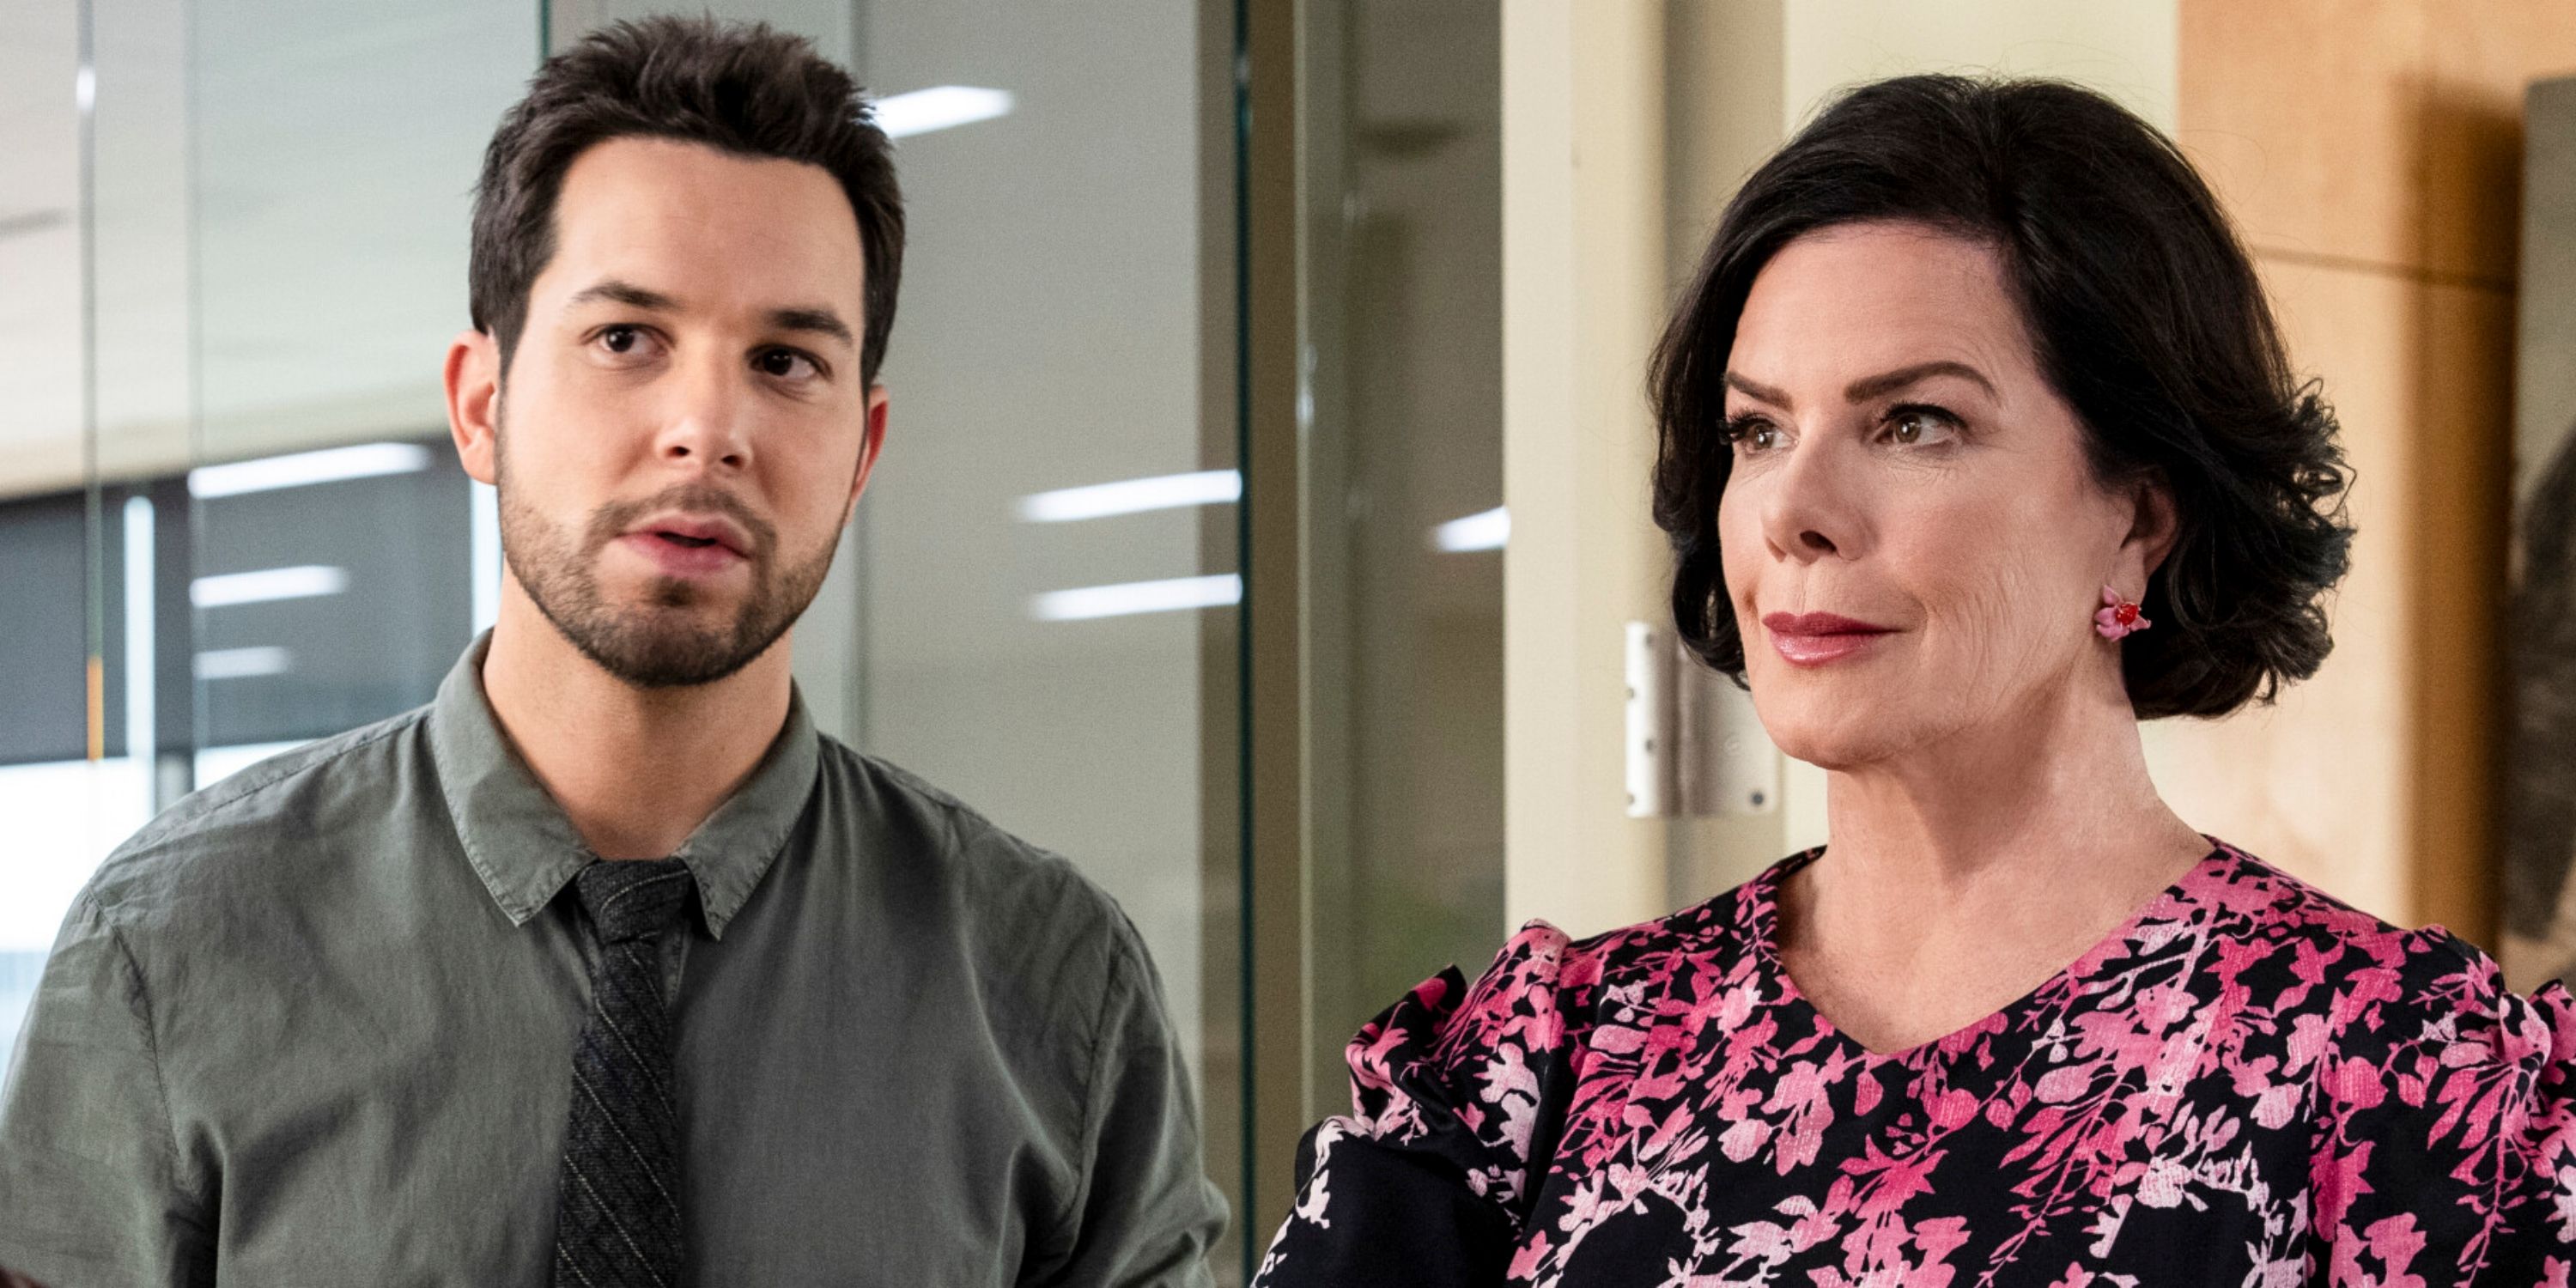 Skylar Astin as Todd and Marcia Gay Harden as Margaret standing together in Season 2 of CBS' So Help Me Todd